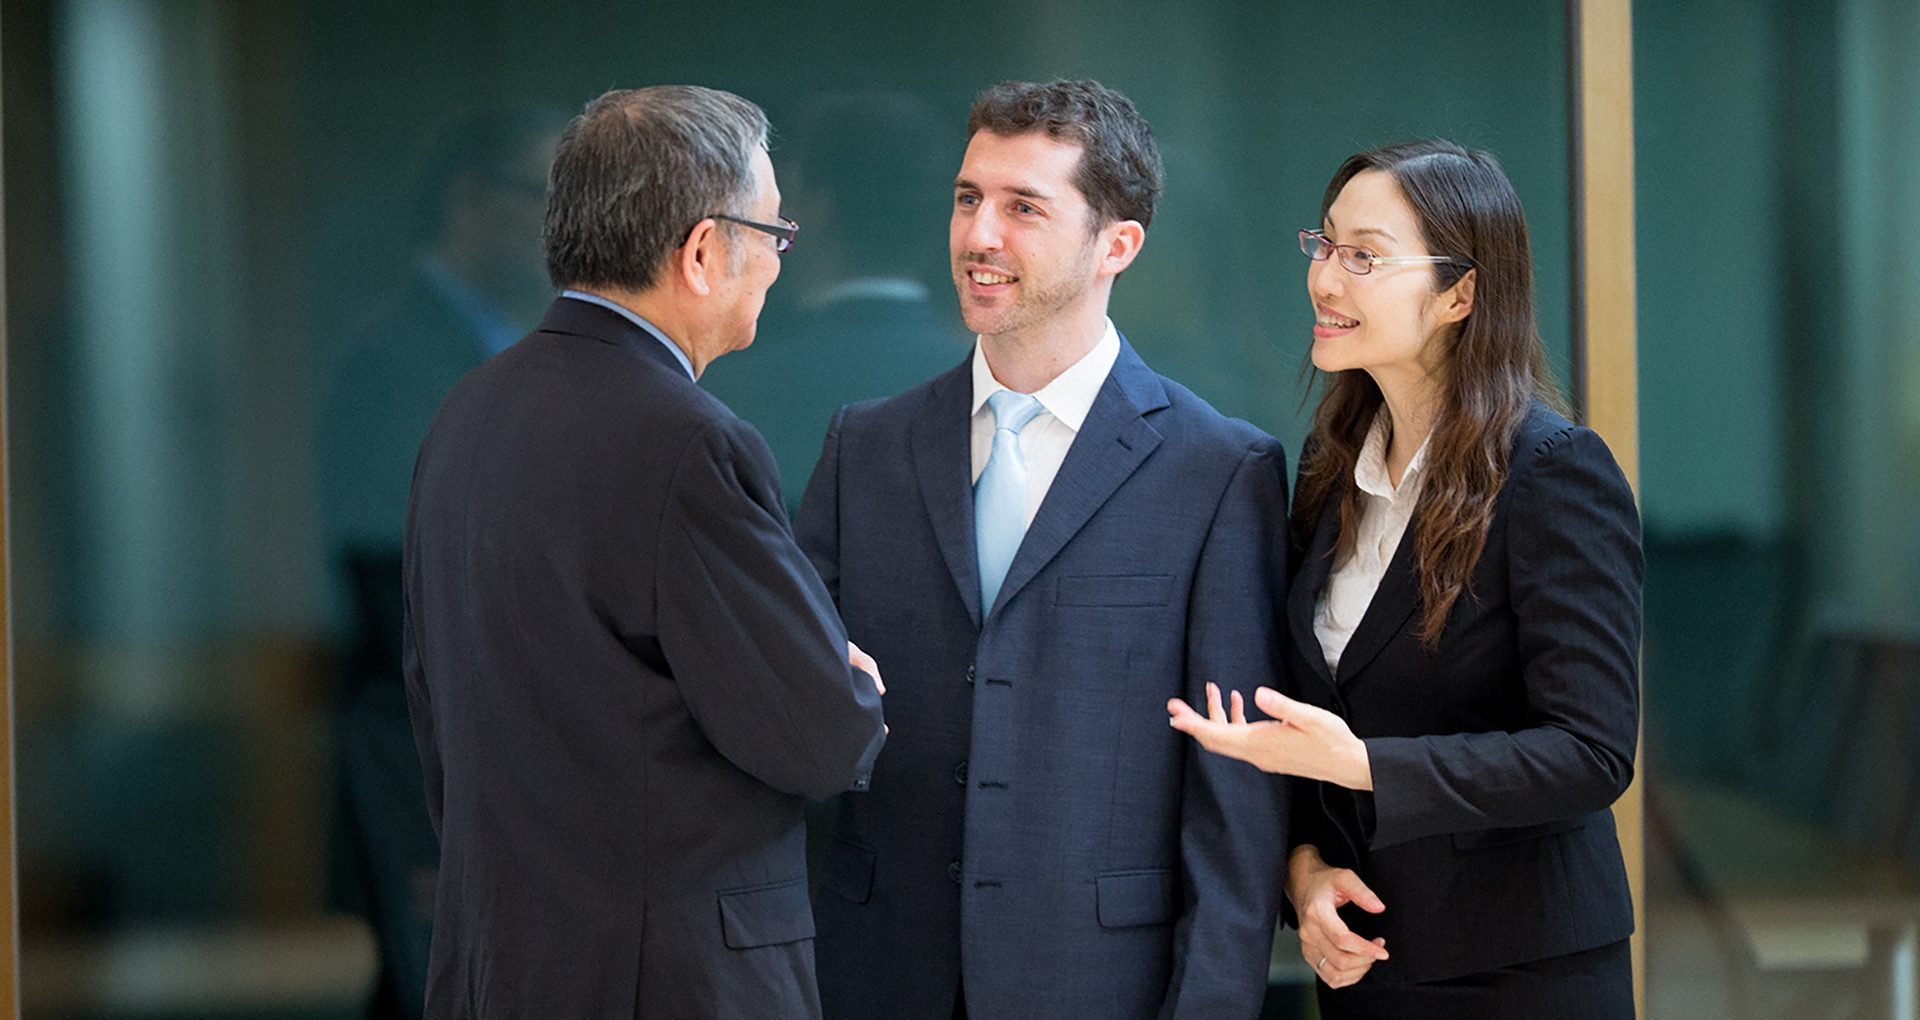 Business people meeting while using an interpreter to assist in communication.